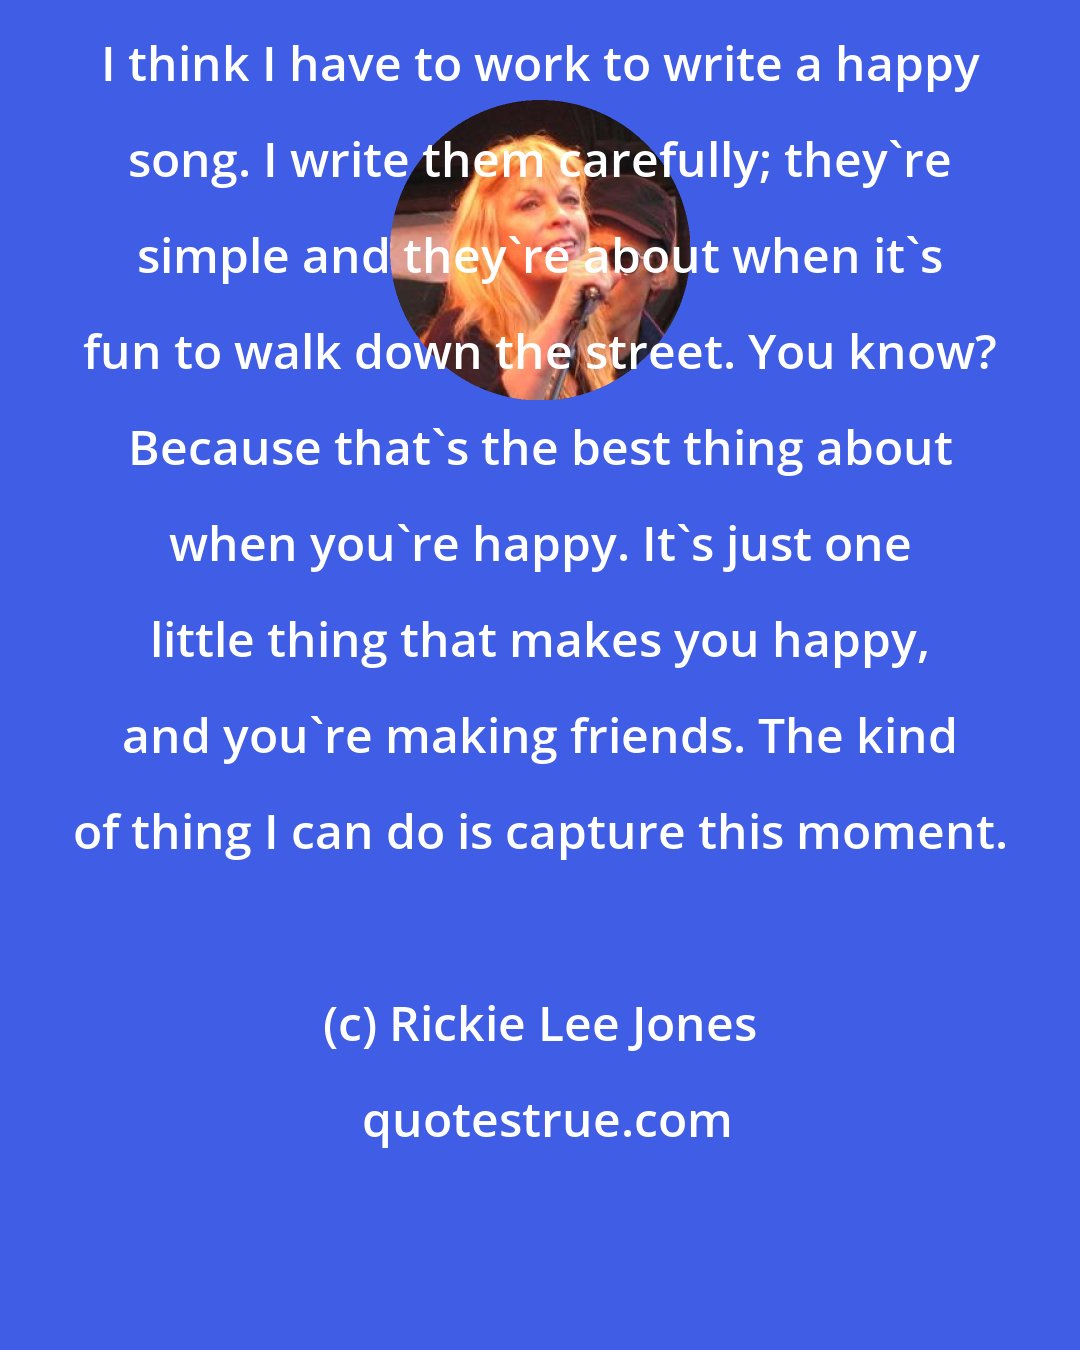 Rickie Lee Jones: I think I have to work to write a happy song. I write them carefully; they're simple and they're about when it's fun to walk down the street. You know? Because that's the best thing about when you're happy. It's just one little thing that makes you happy, and you're making friends. The kind of thing I can do is capture this moment.